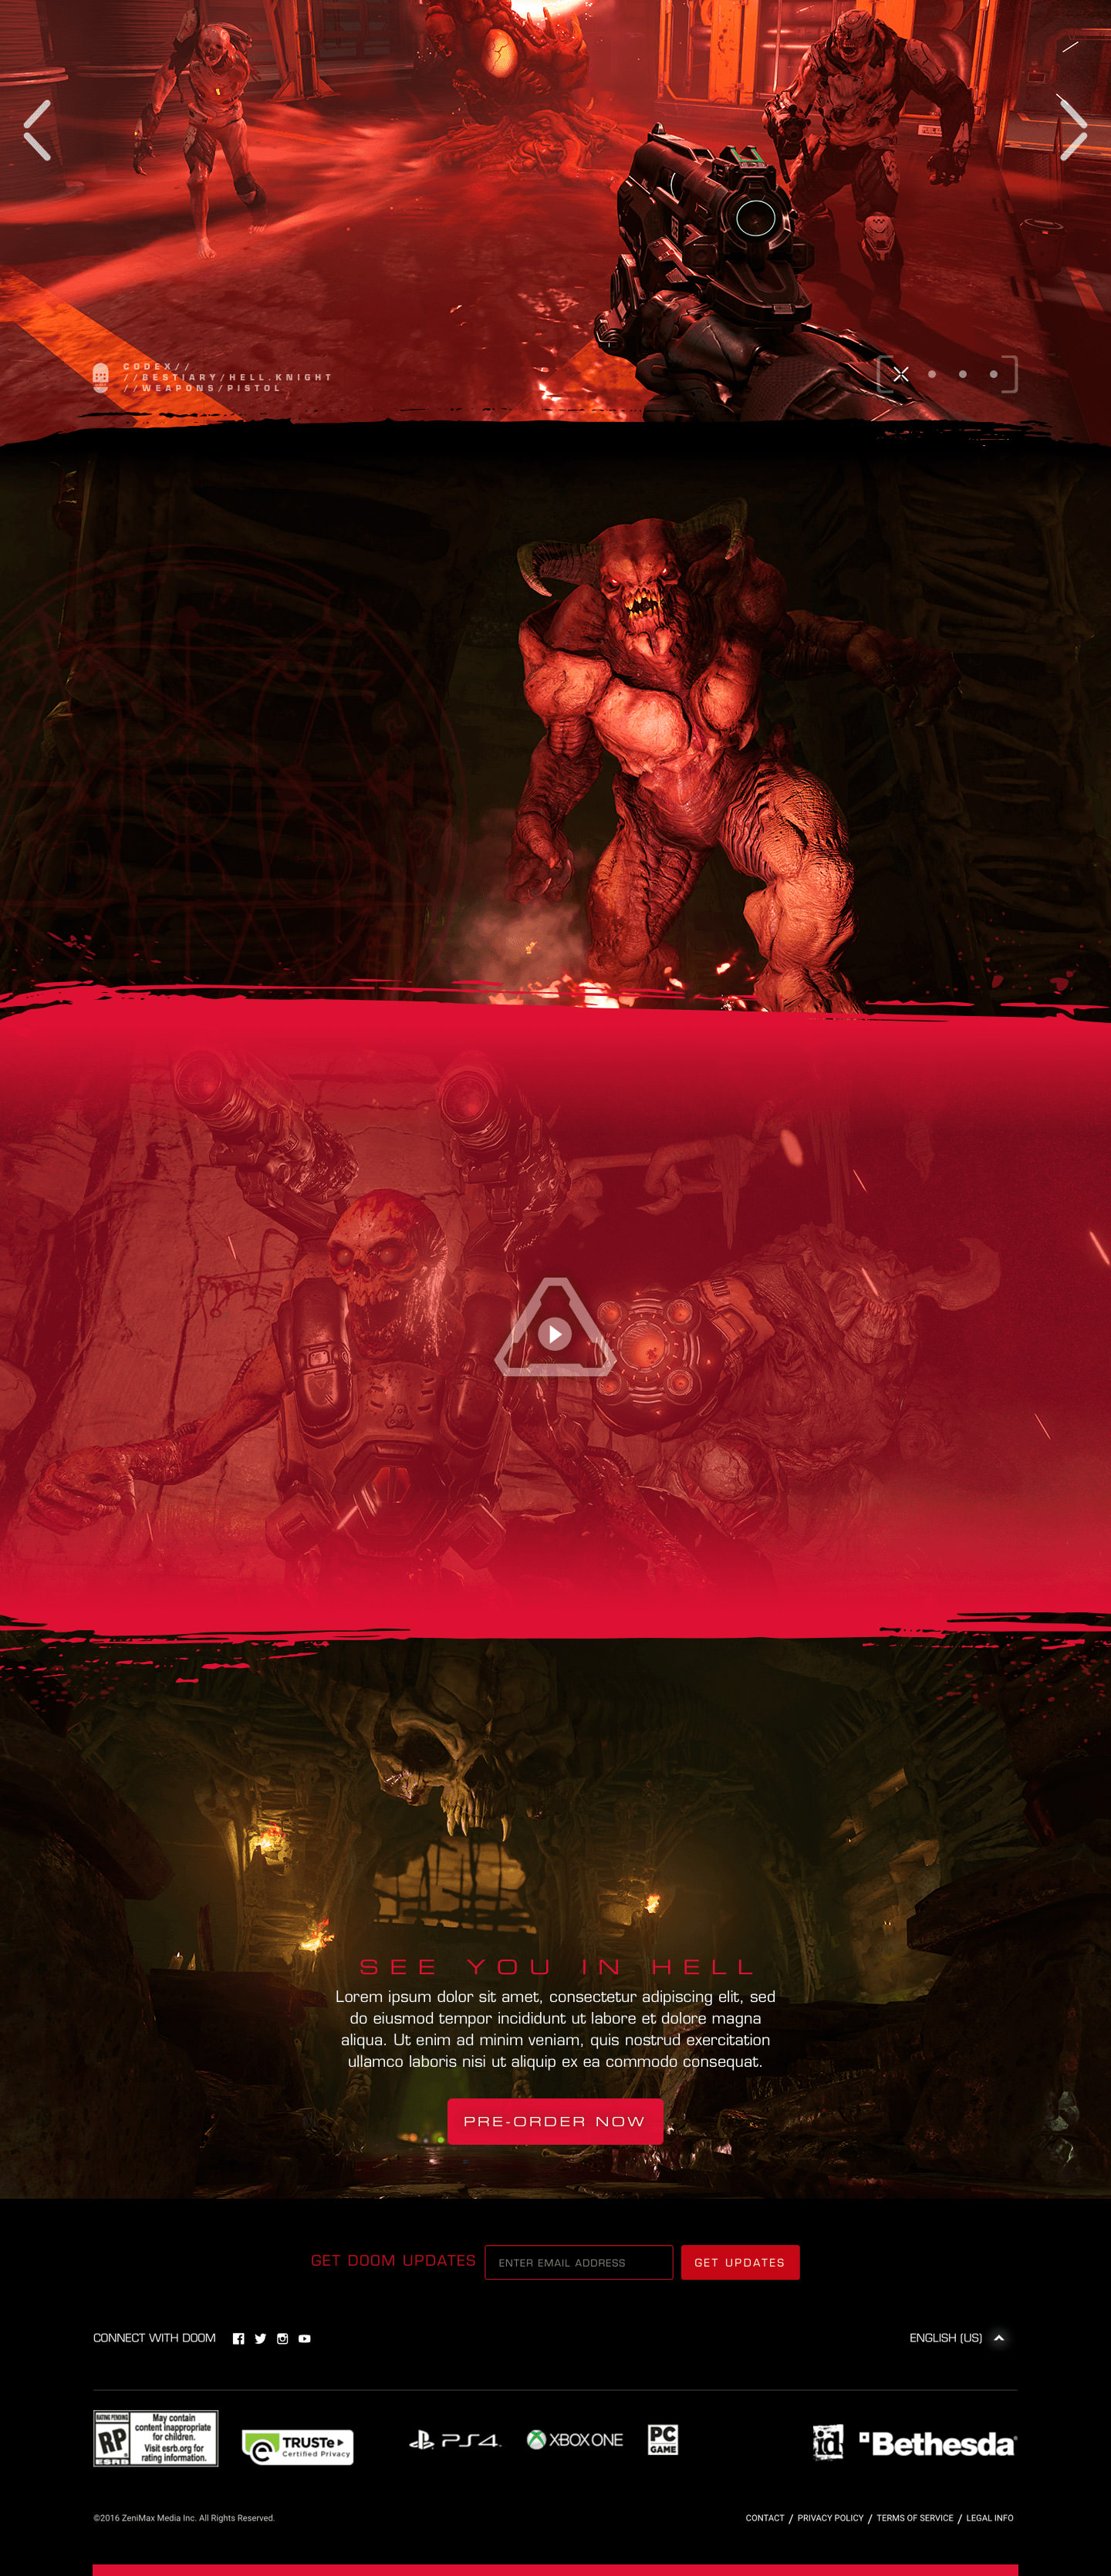 Concept design for the proposed "Descent Into Hell" DOOM site redesign